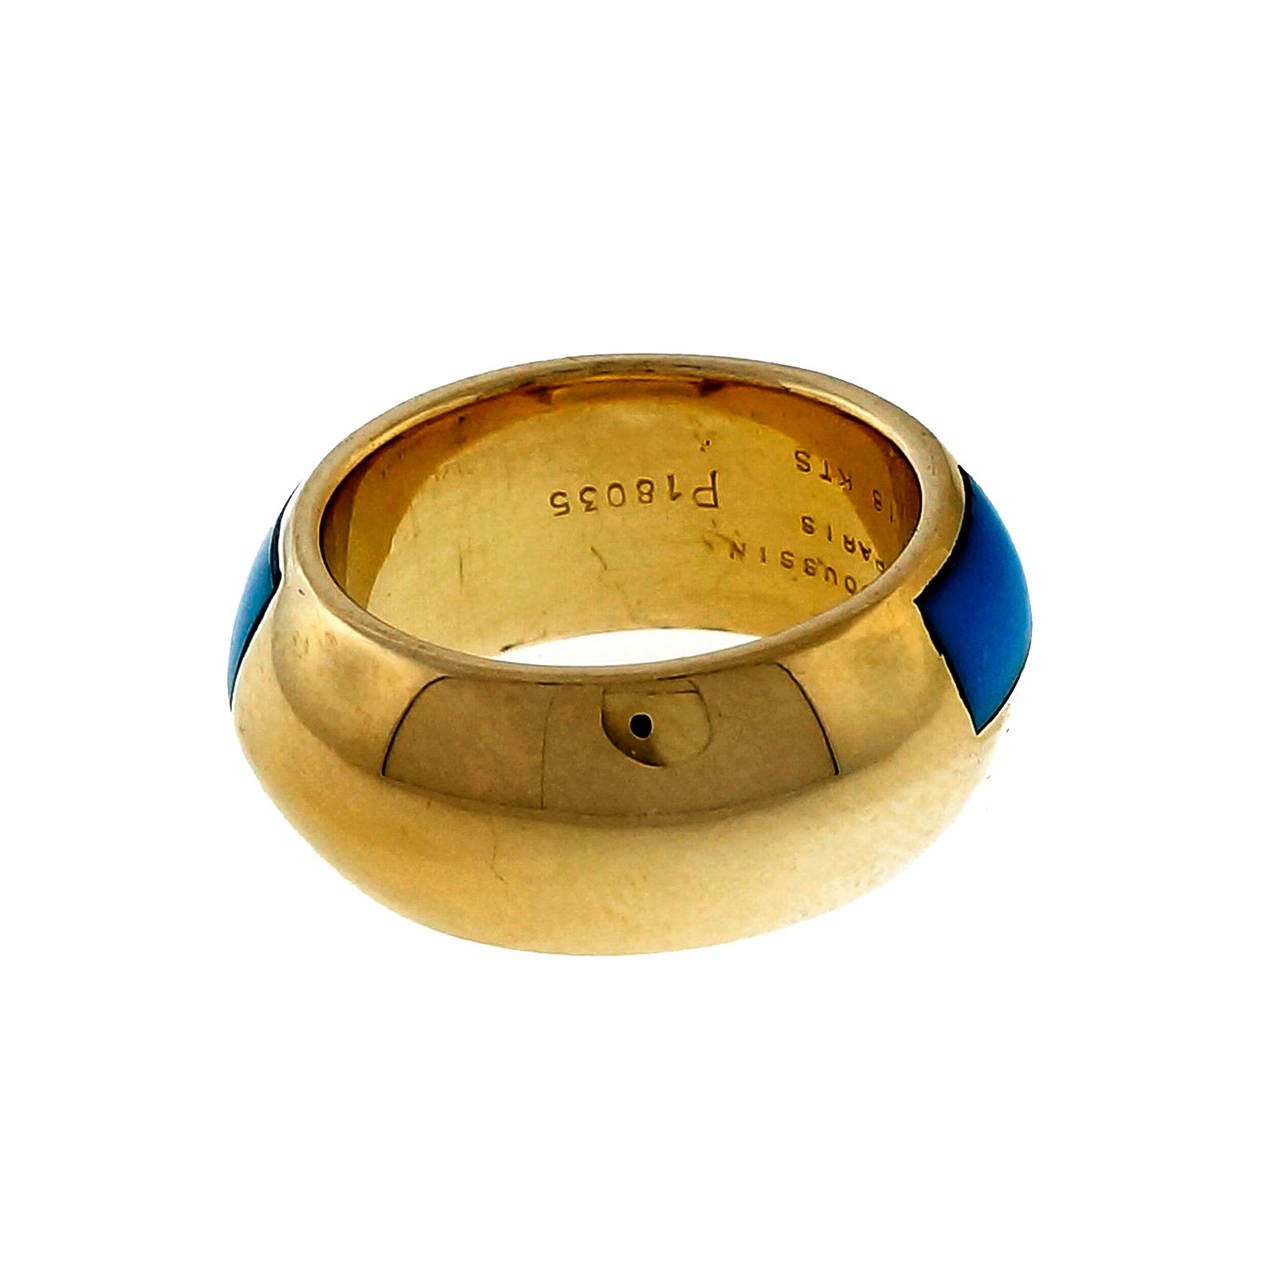 Fantastic design from one of the world’s finest jewelers Mauboussin Paris. Bright blue natural inlaid Turquoise, circa 1990

5 inlaid Turquoise 8.90 x 4.35mm
18k yellow gold
11.9 grams
Tested and stamped:  18k
Hallmark: Mauboussin Paris